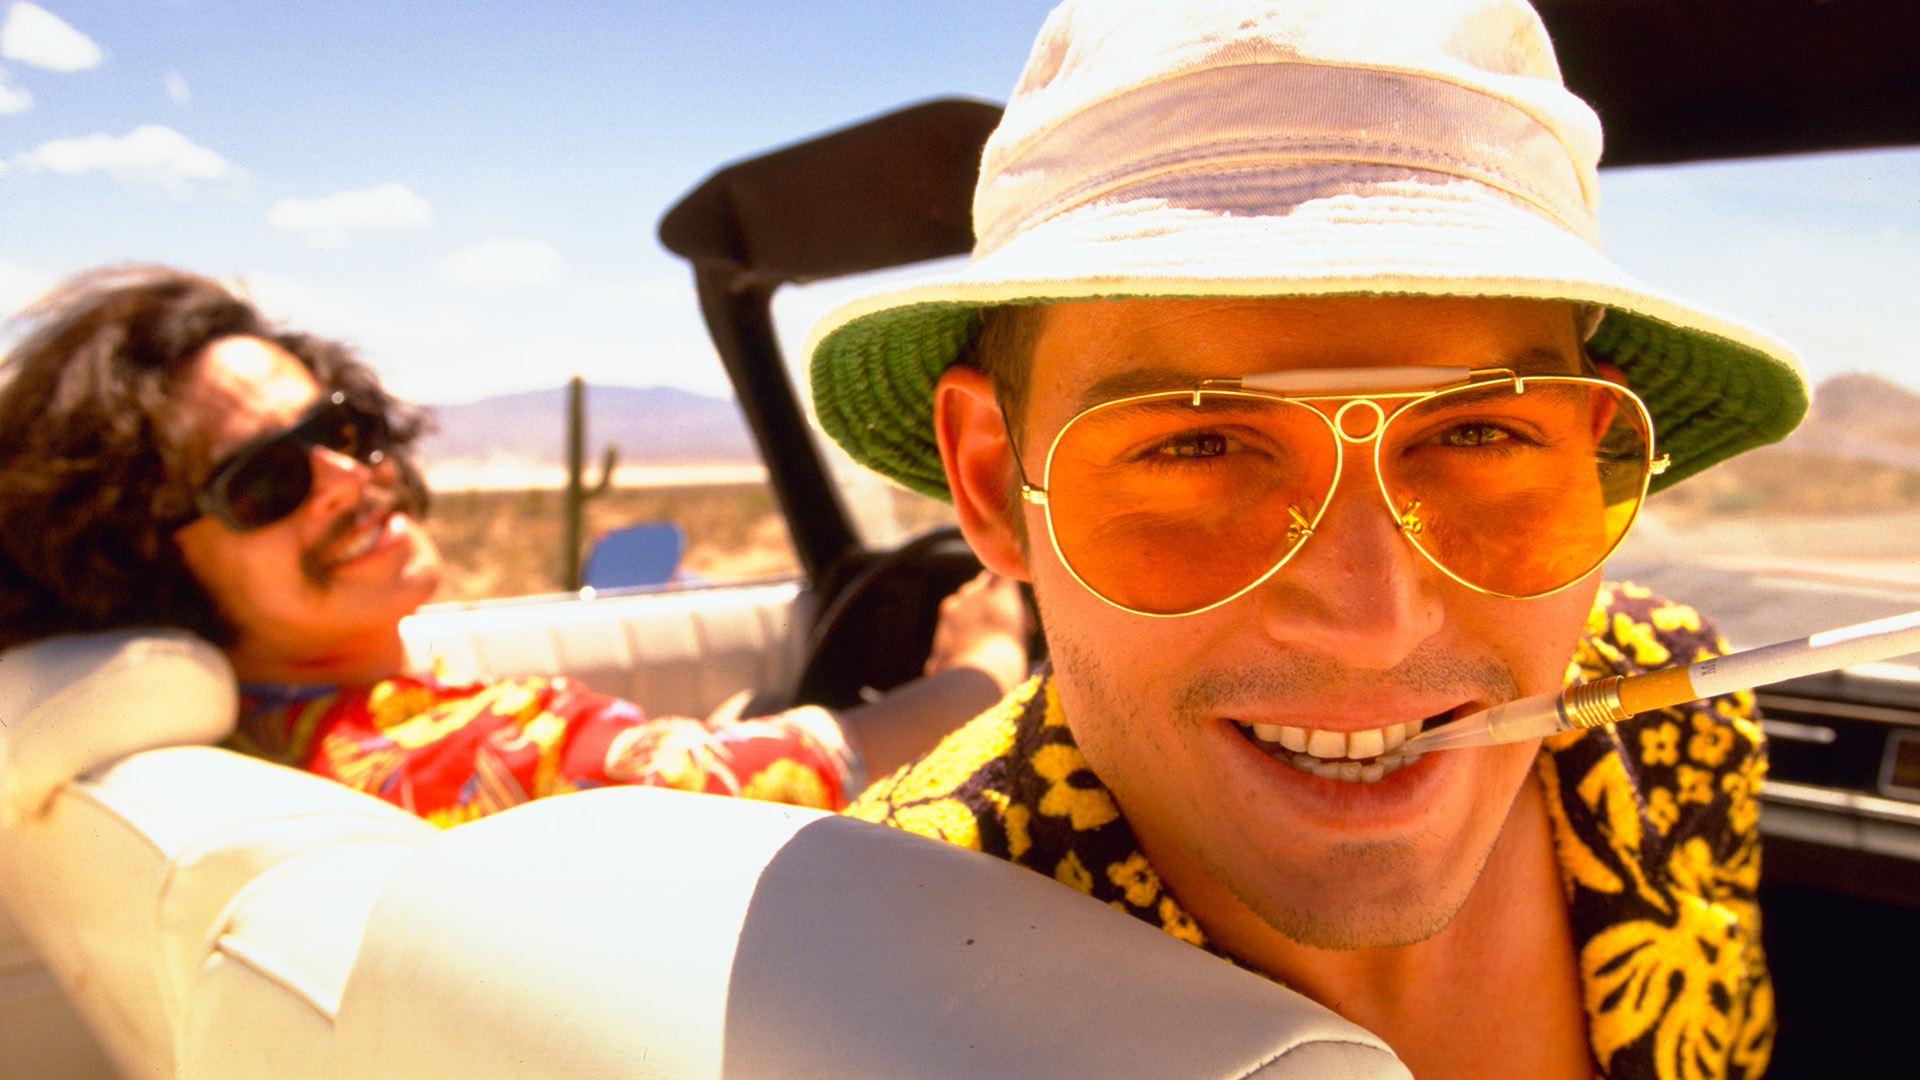 High Resolution Wallpaper | Fear And Loathing 1920x1080 px